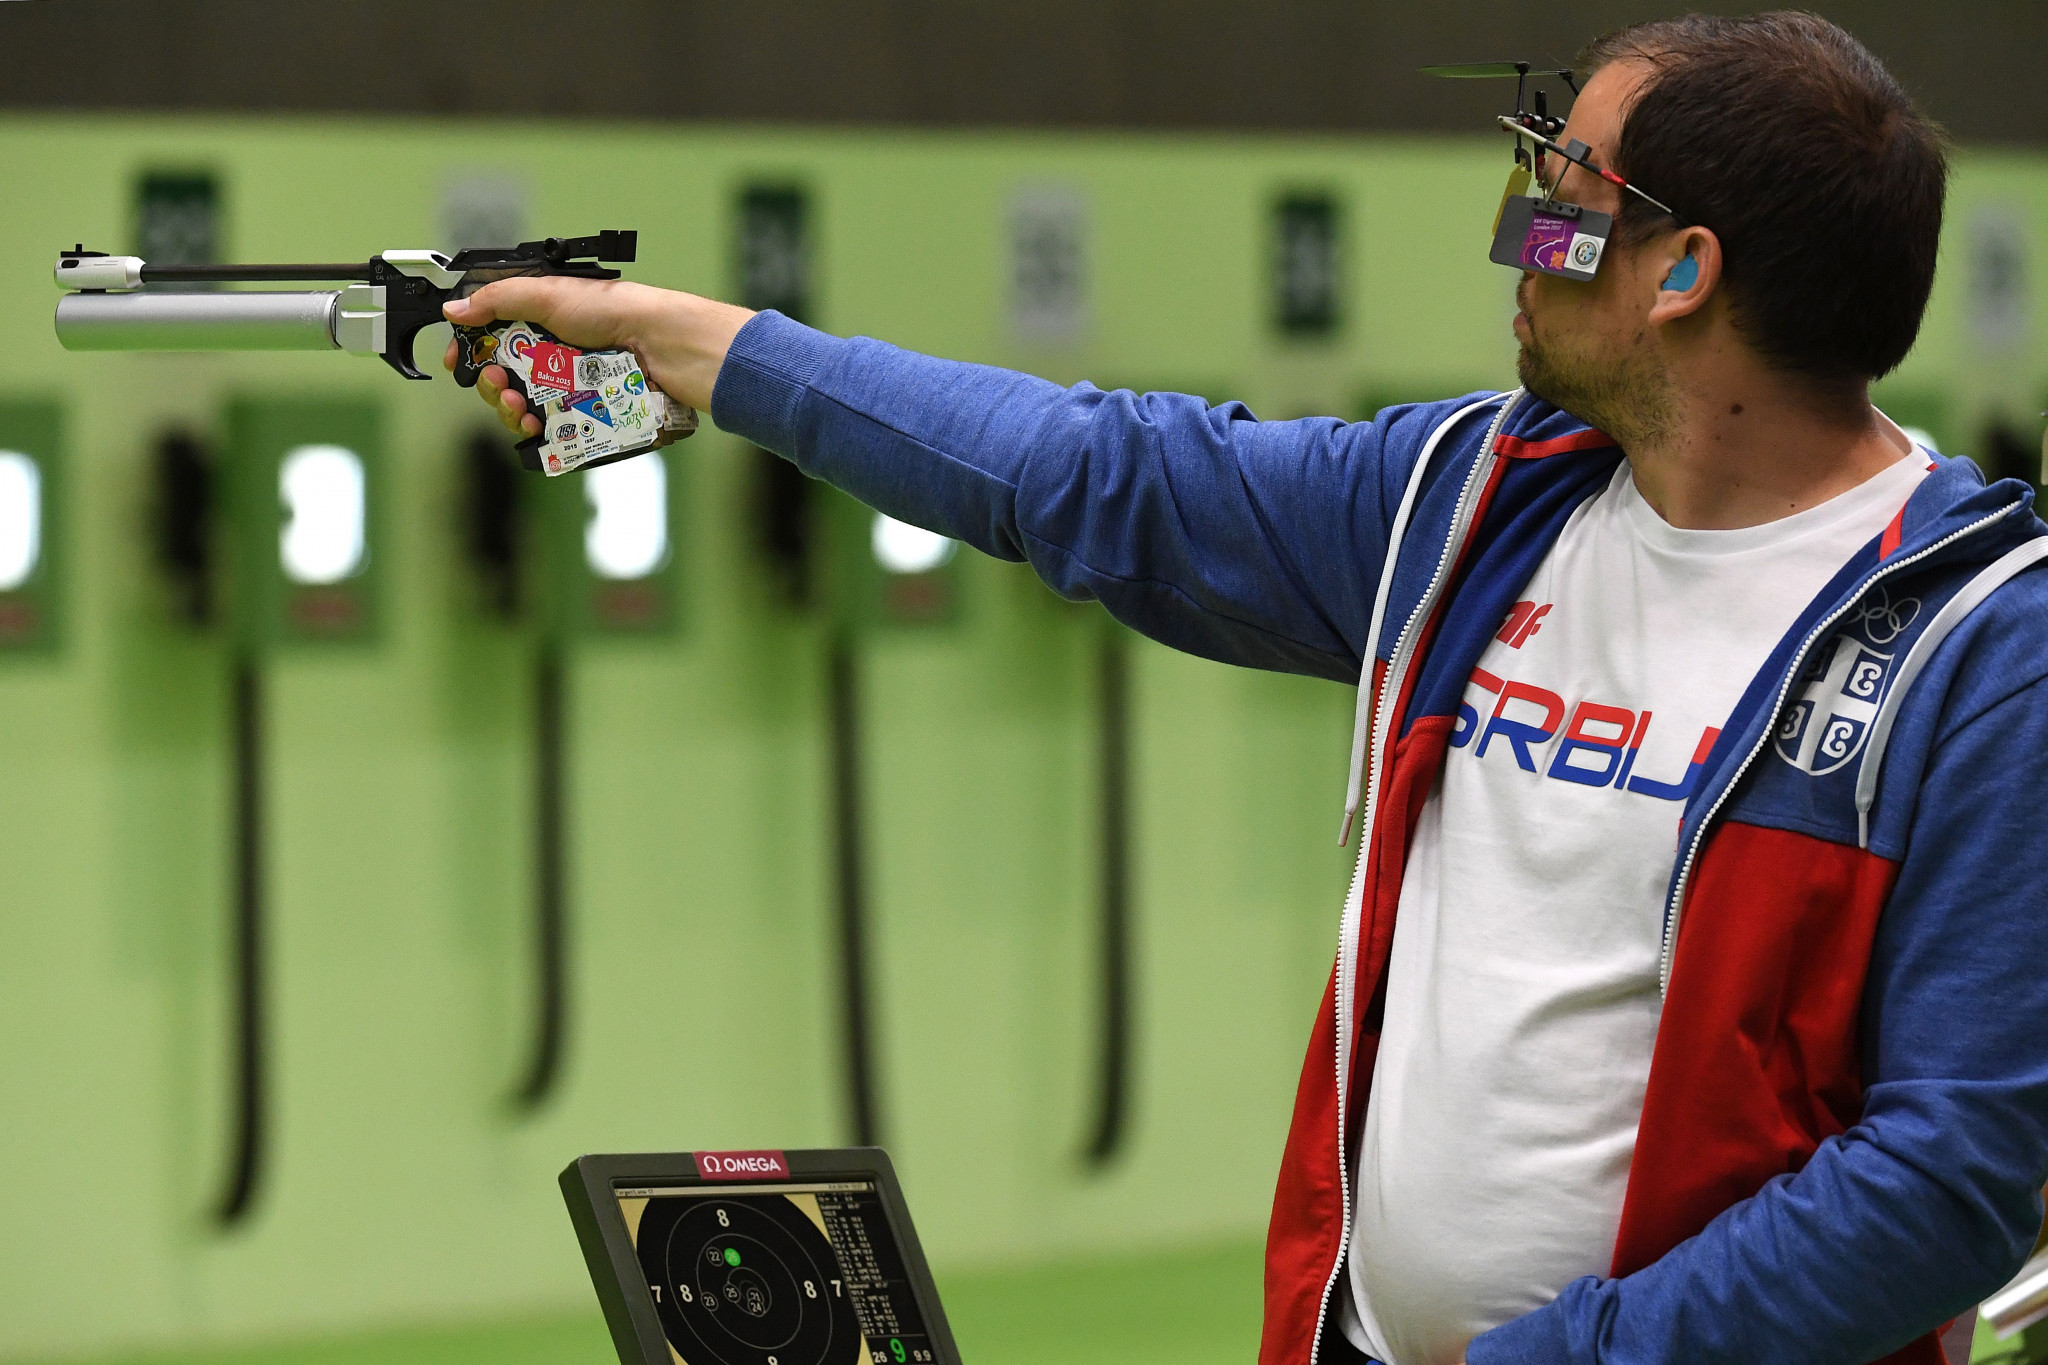 Tokyo 2020 Olympic silver medallist Damir Mikec contributed to Serbia's second gold of the Grand Prix in Osijek in the men's team air pistol ©Getty Images